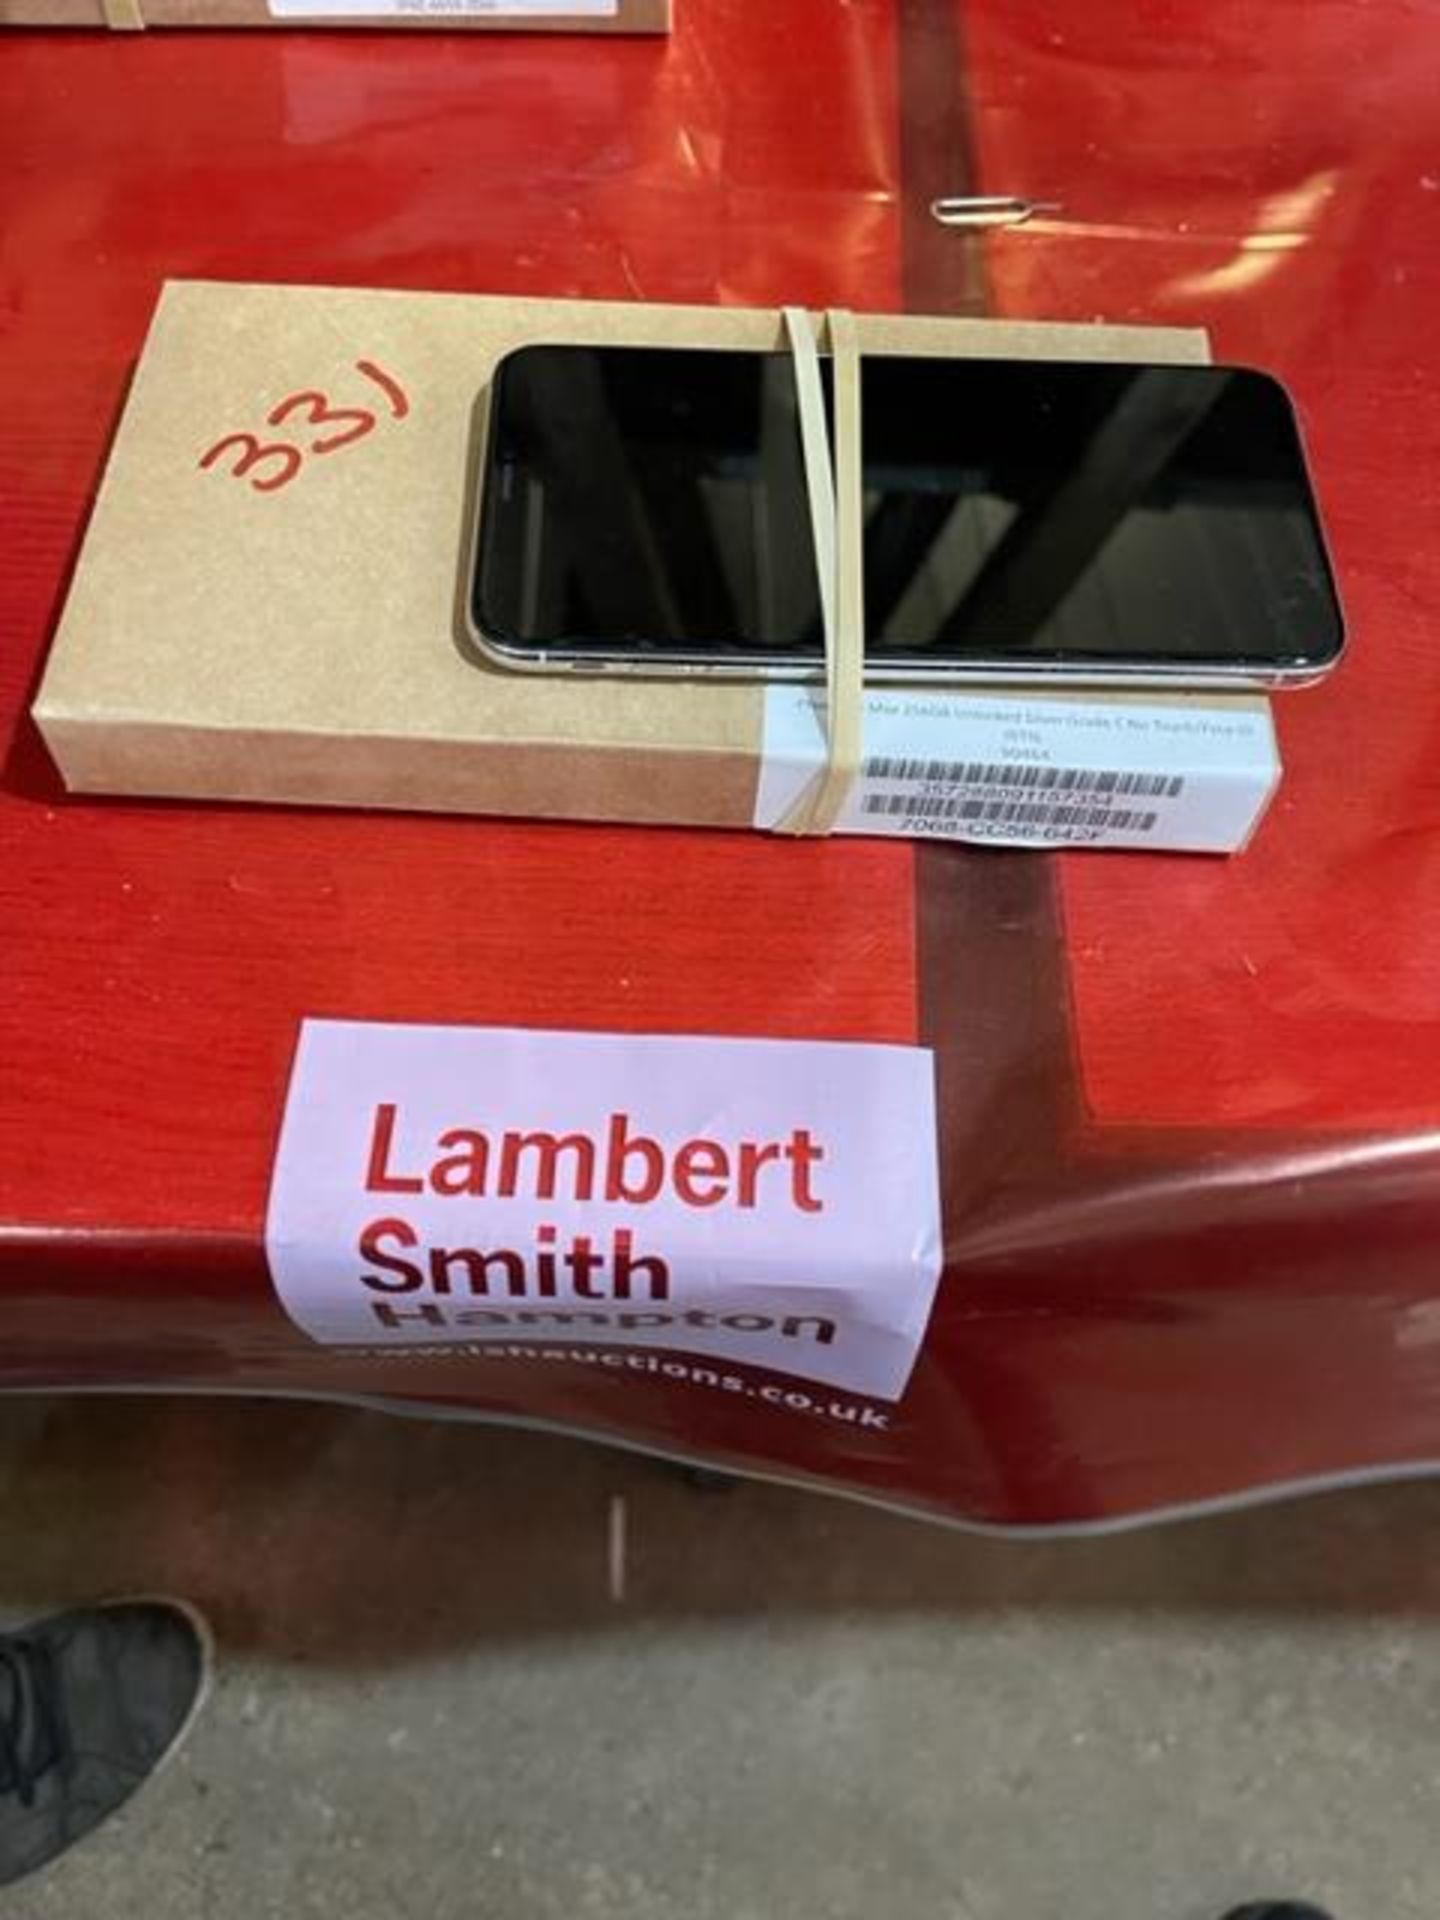 iPhone XS Max 256GB, silver grade C - no touch/face ID